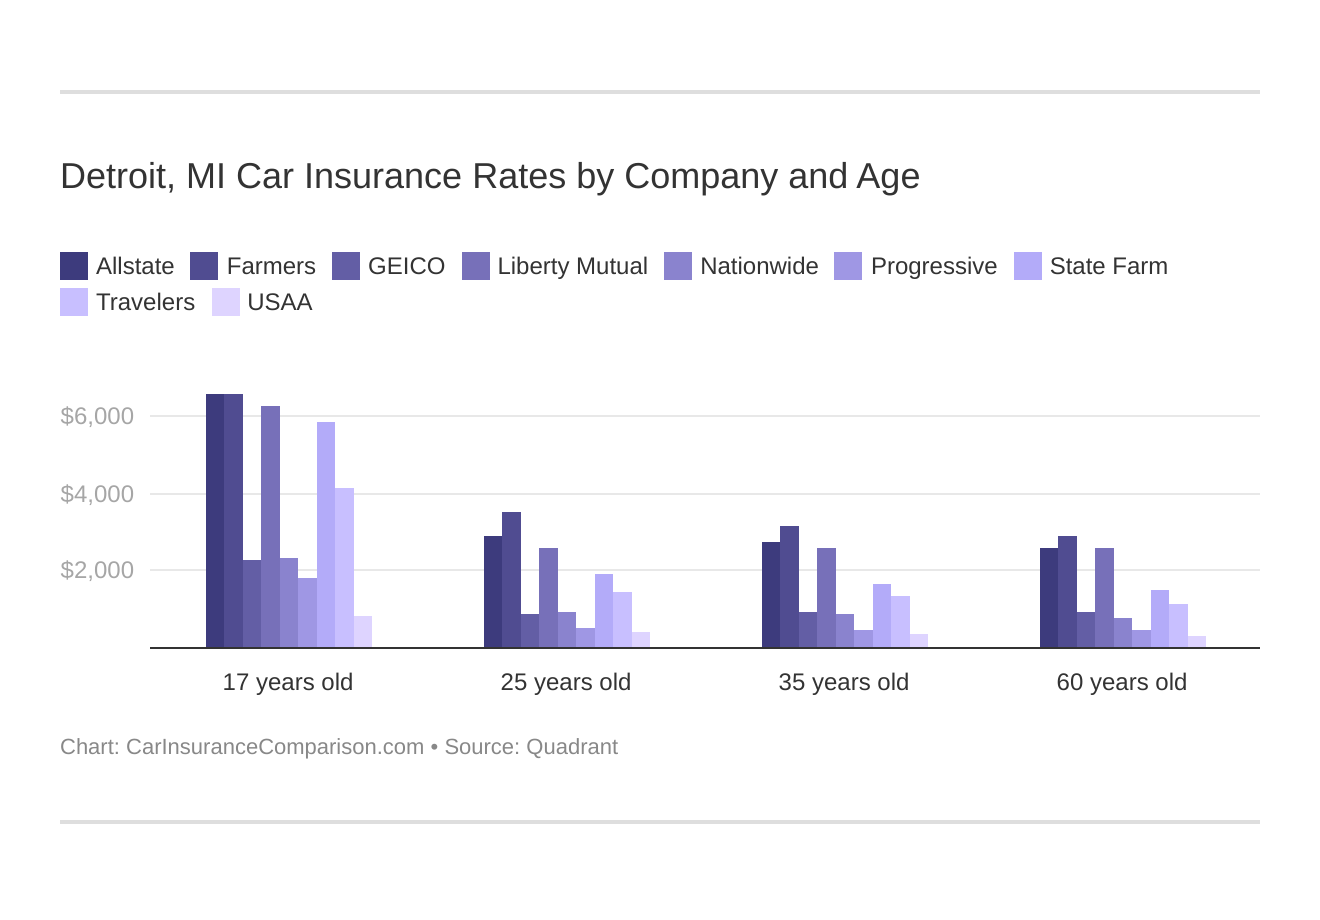 Detroit, MI Car Insurance Rates by Company and Age